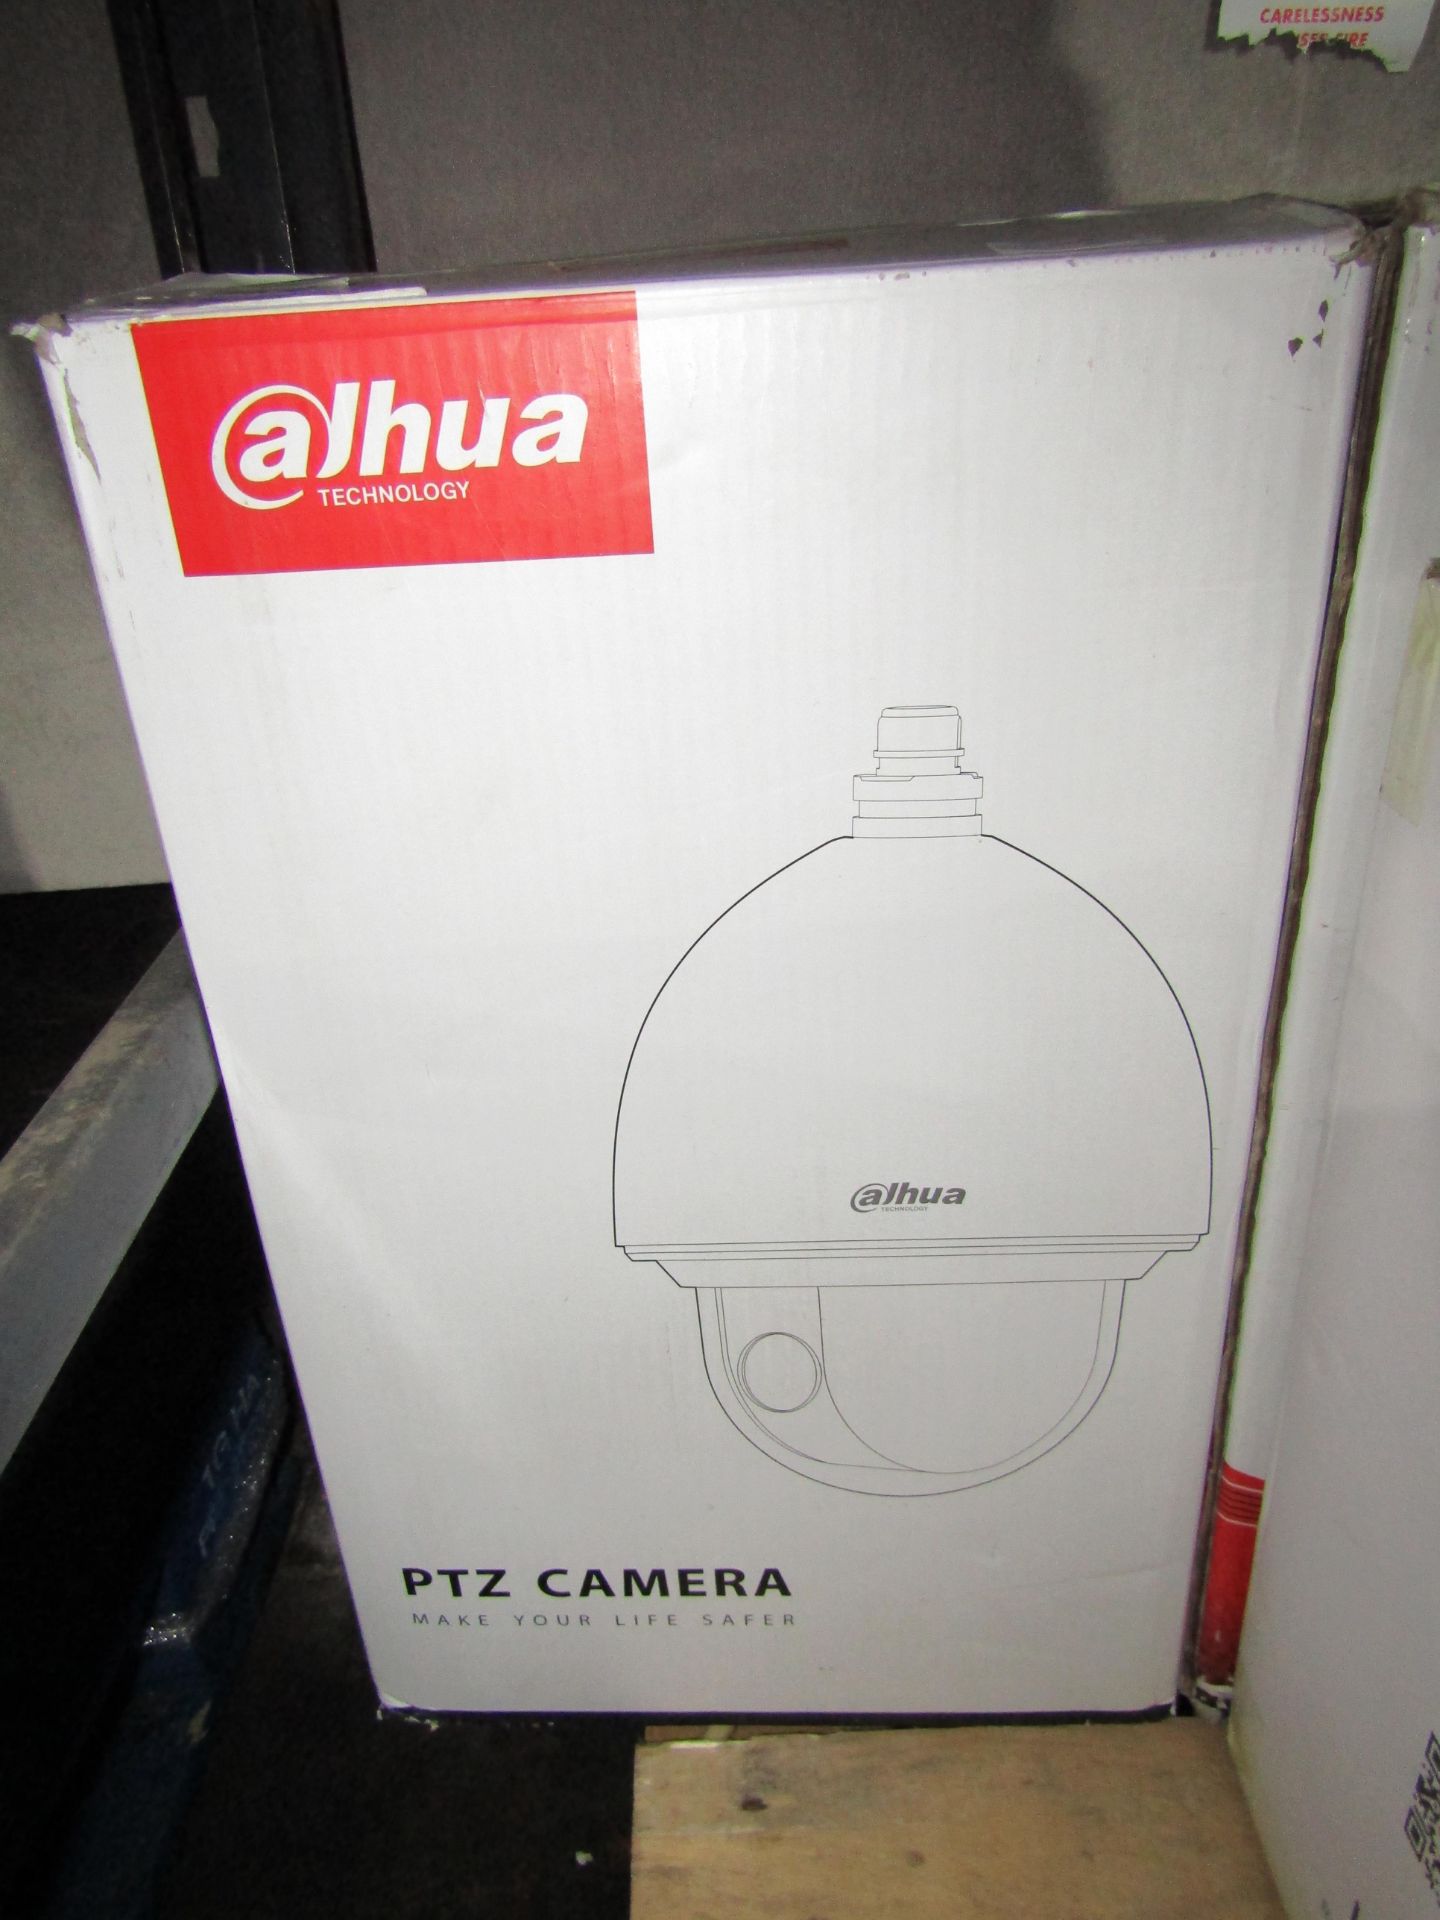 one lot of over 200 items of CCTV and Surveillance equipment, includes DVRs, Cameras, Thermal - Image 50 of 104